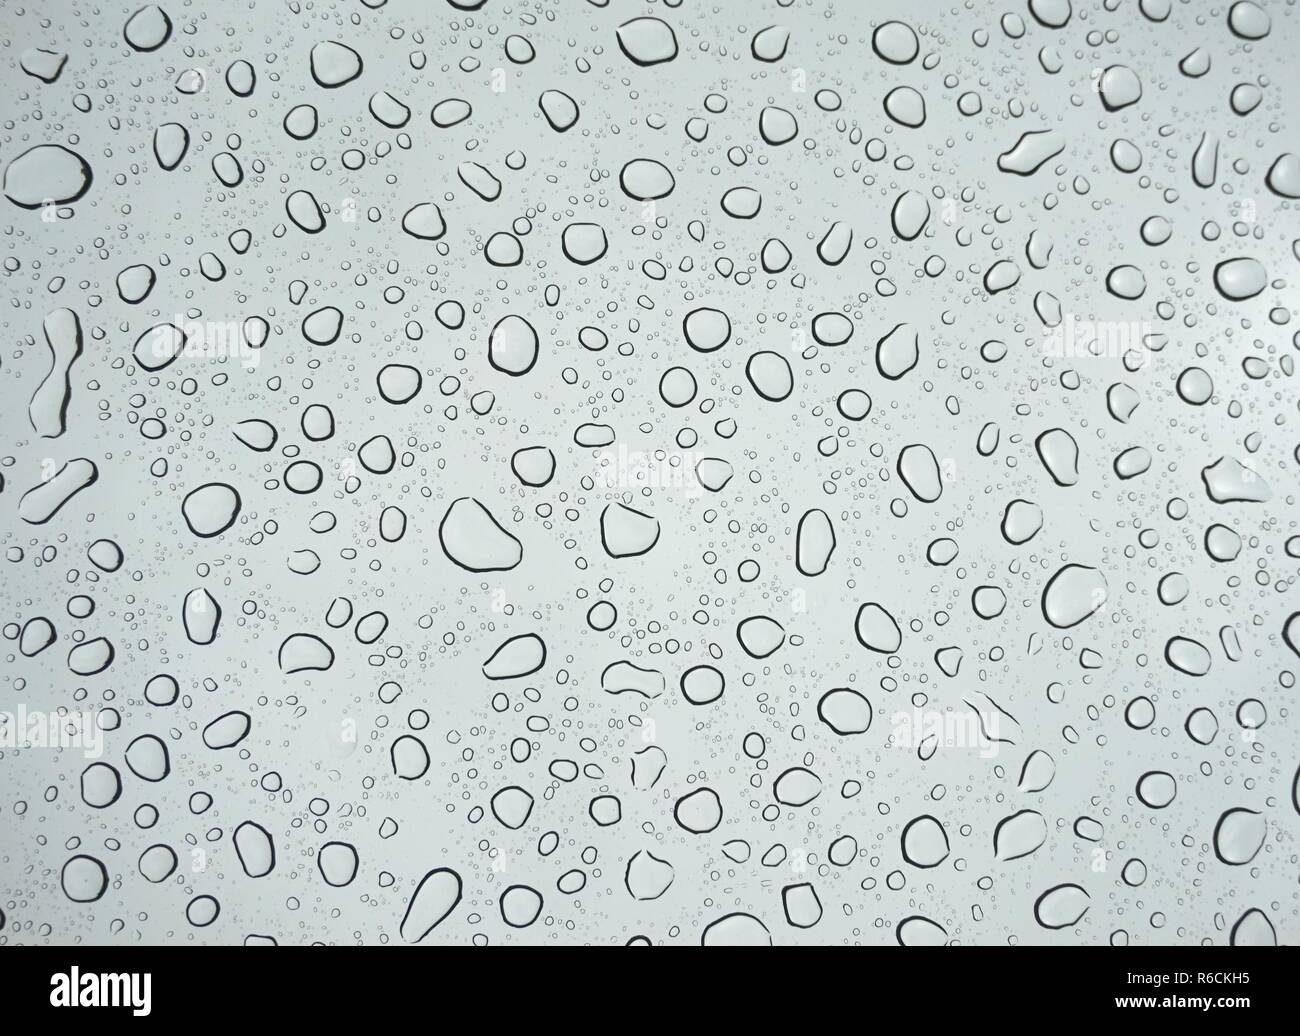 bright background with water drops Stock Photo